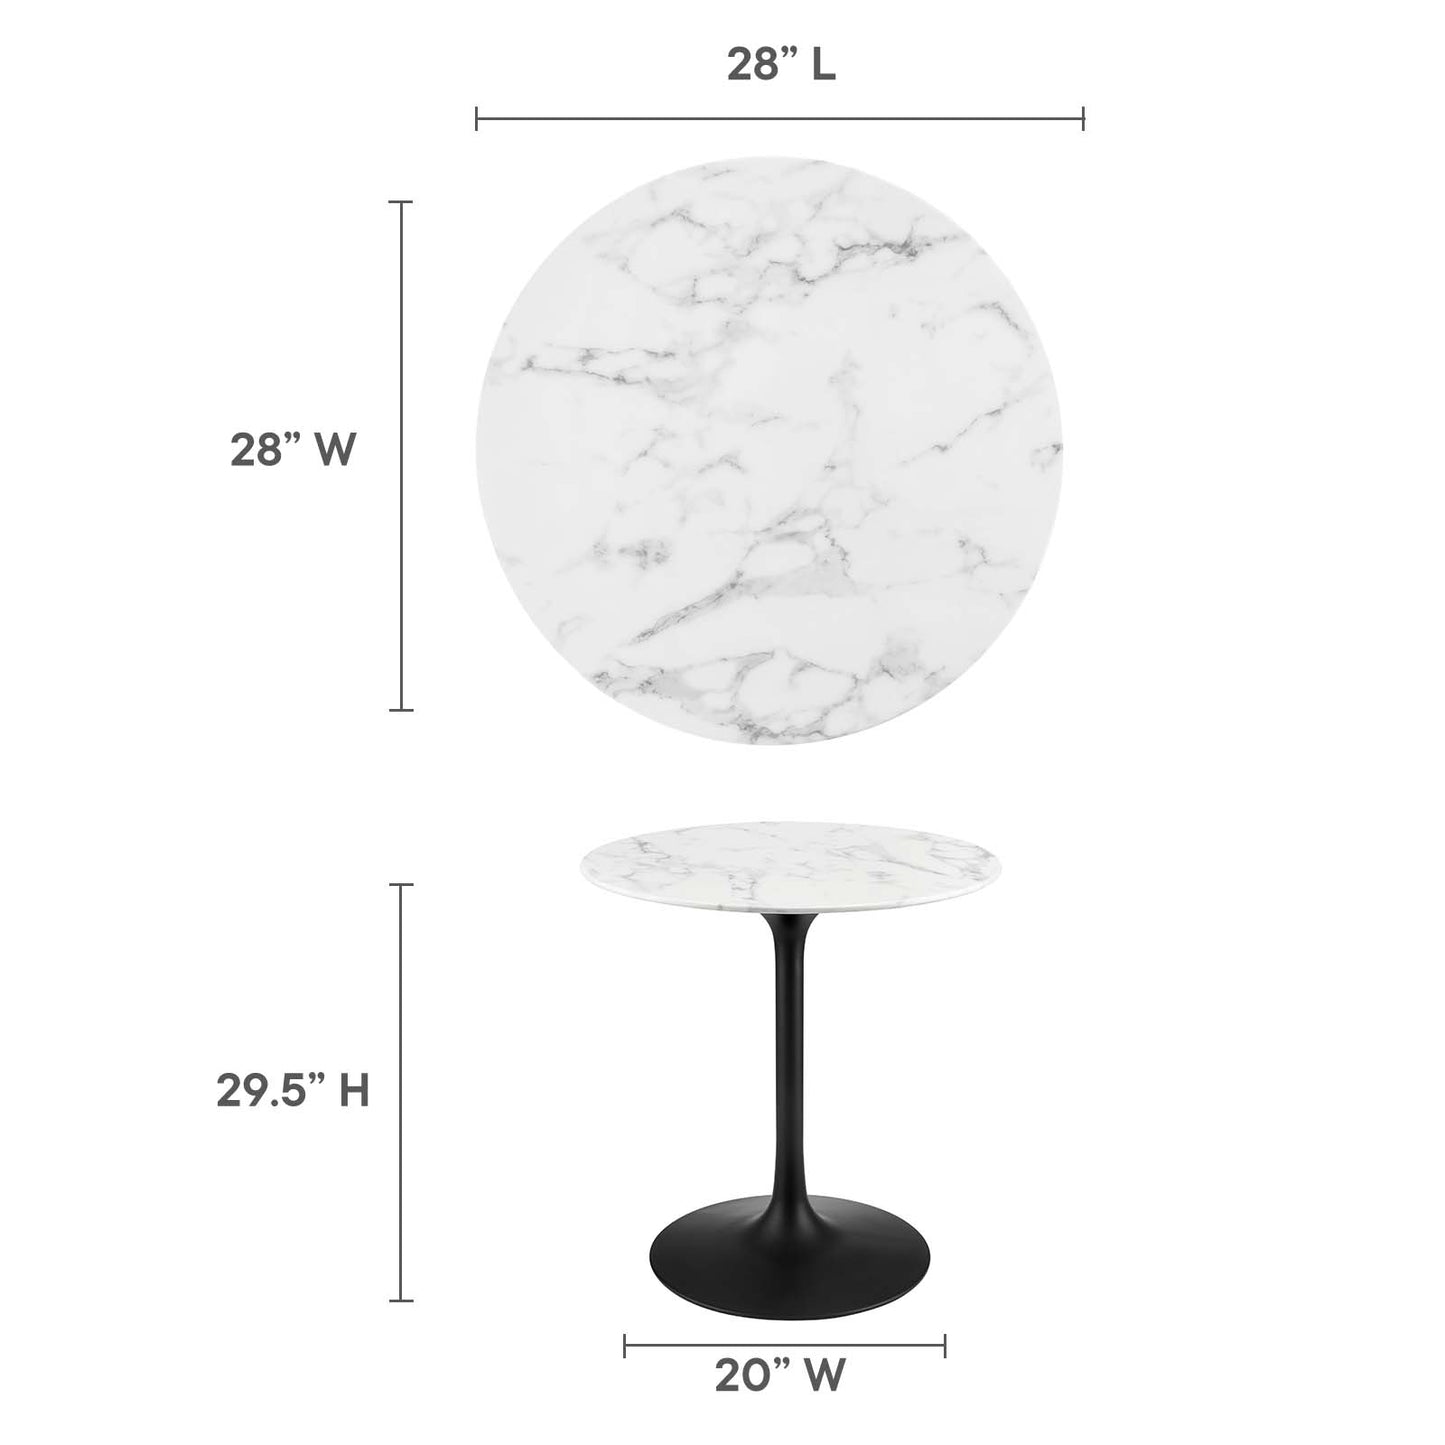 Modway Lippa 28" Round Artificial Marble Dining Table - EEI-3515